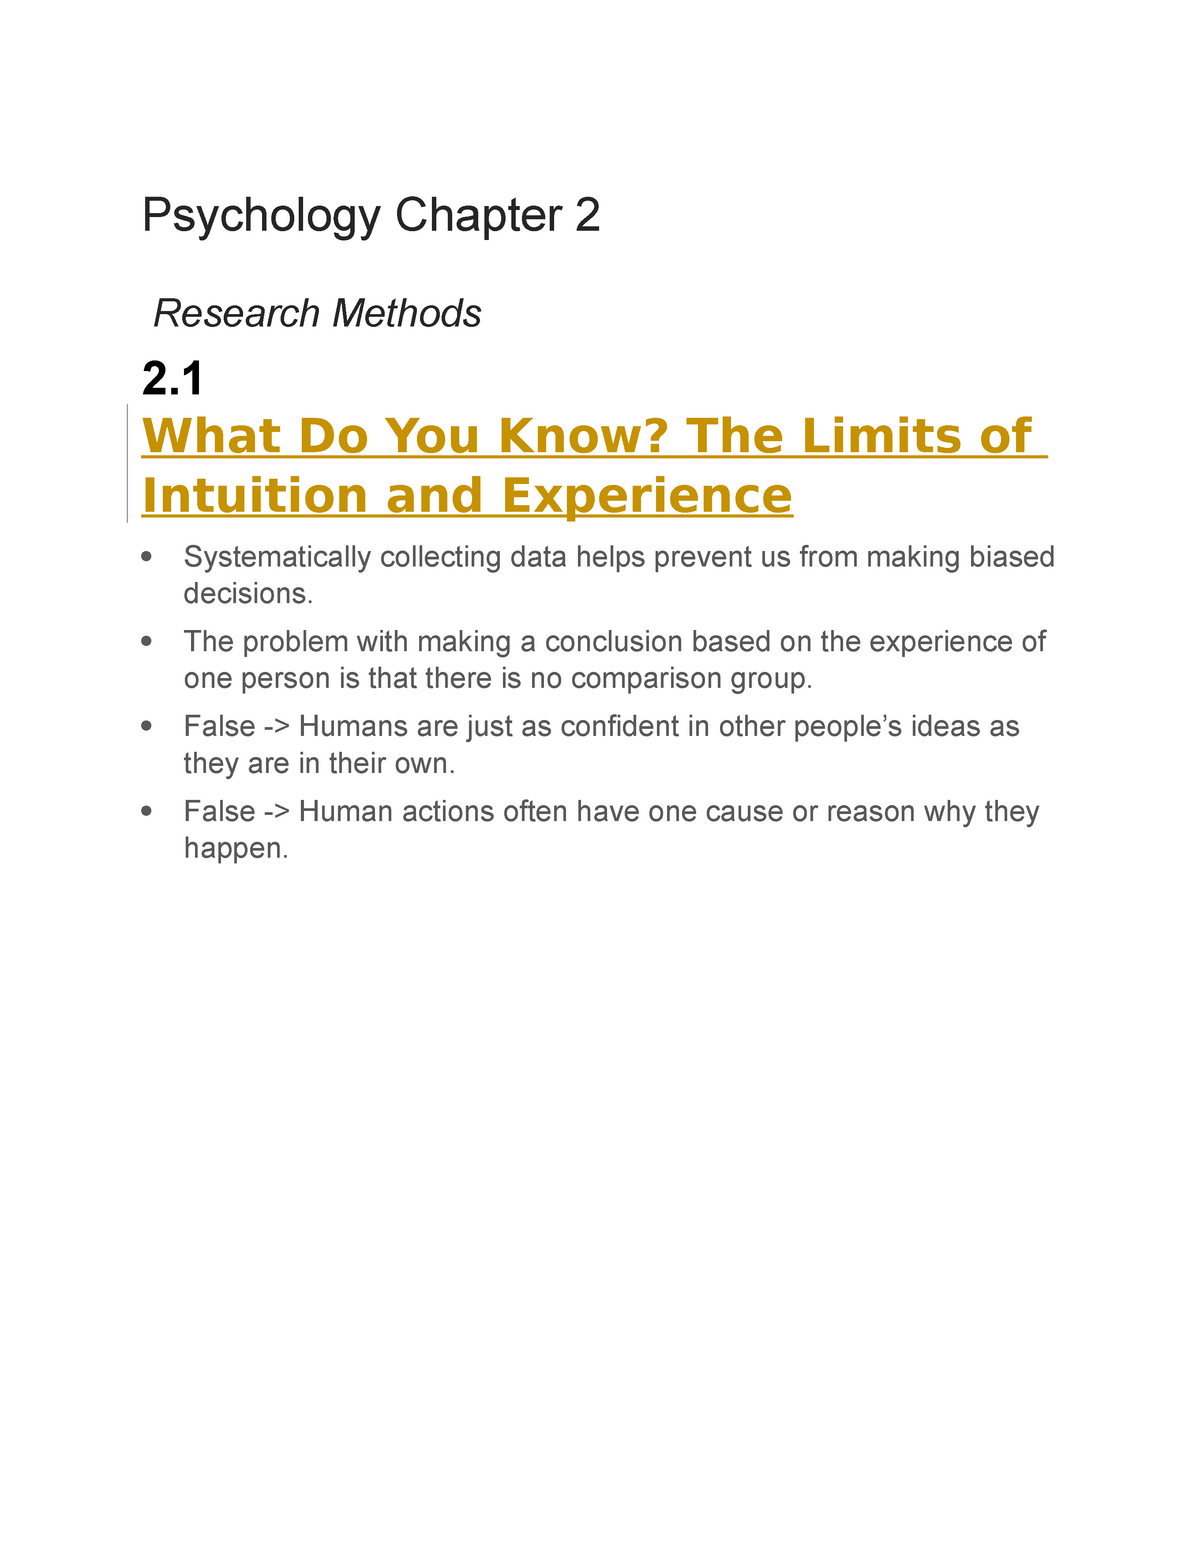 research methods in psychology chapter 2 quizlet